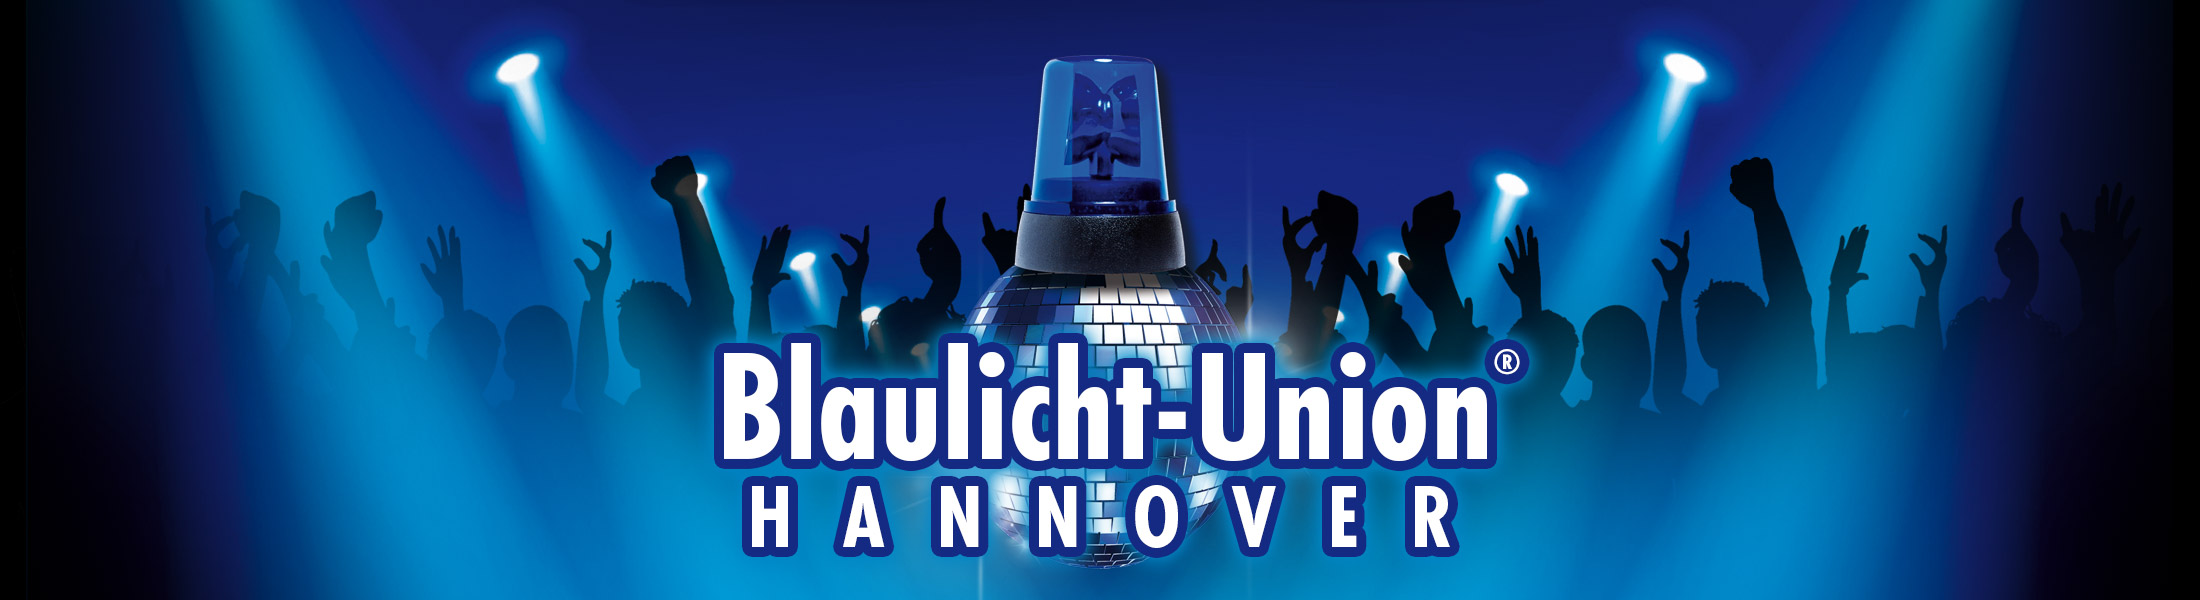 Blaulicht Union Party® Hannover